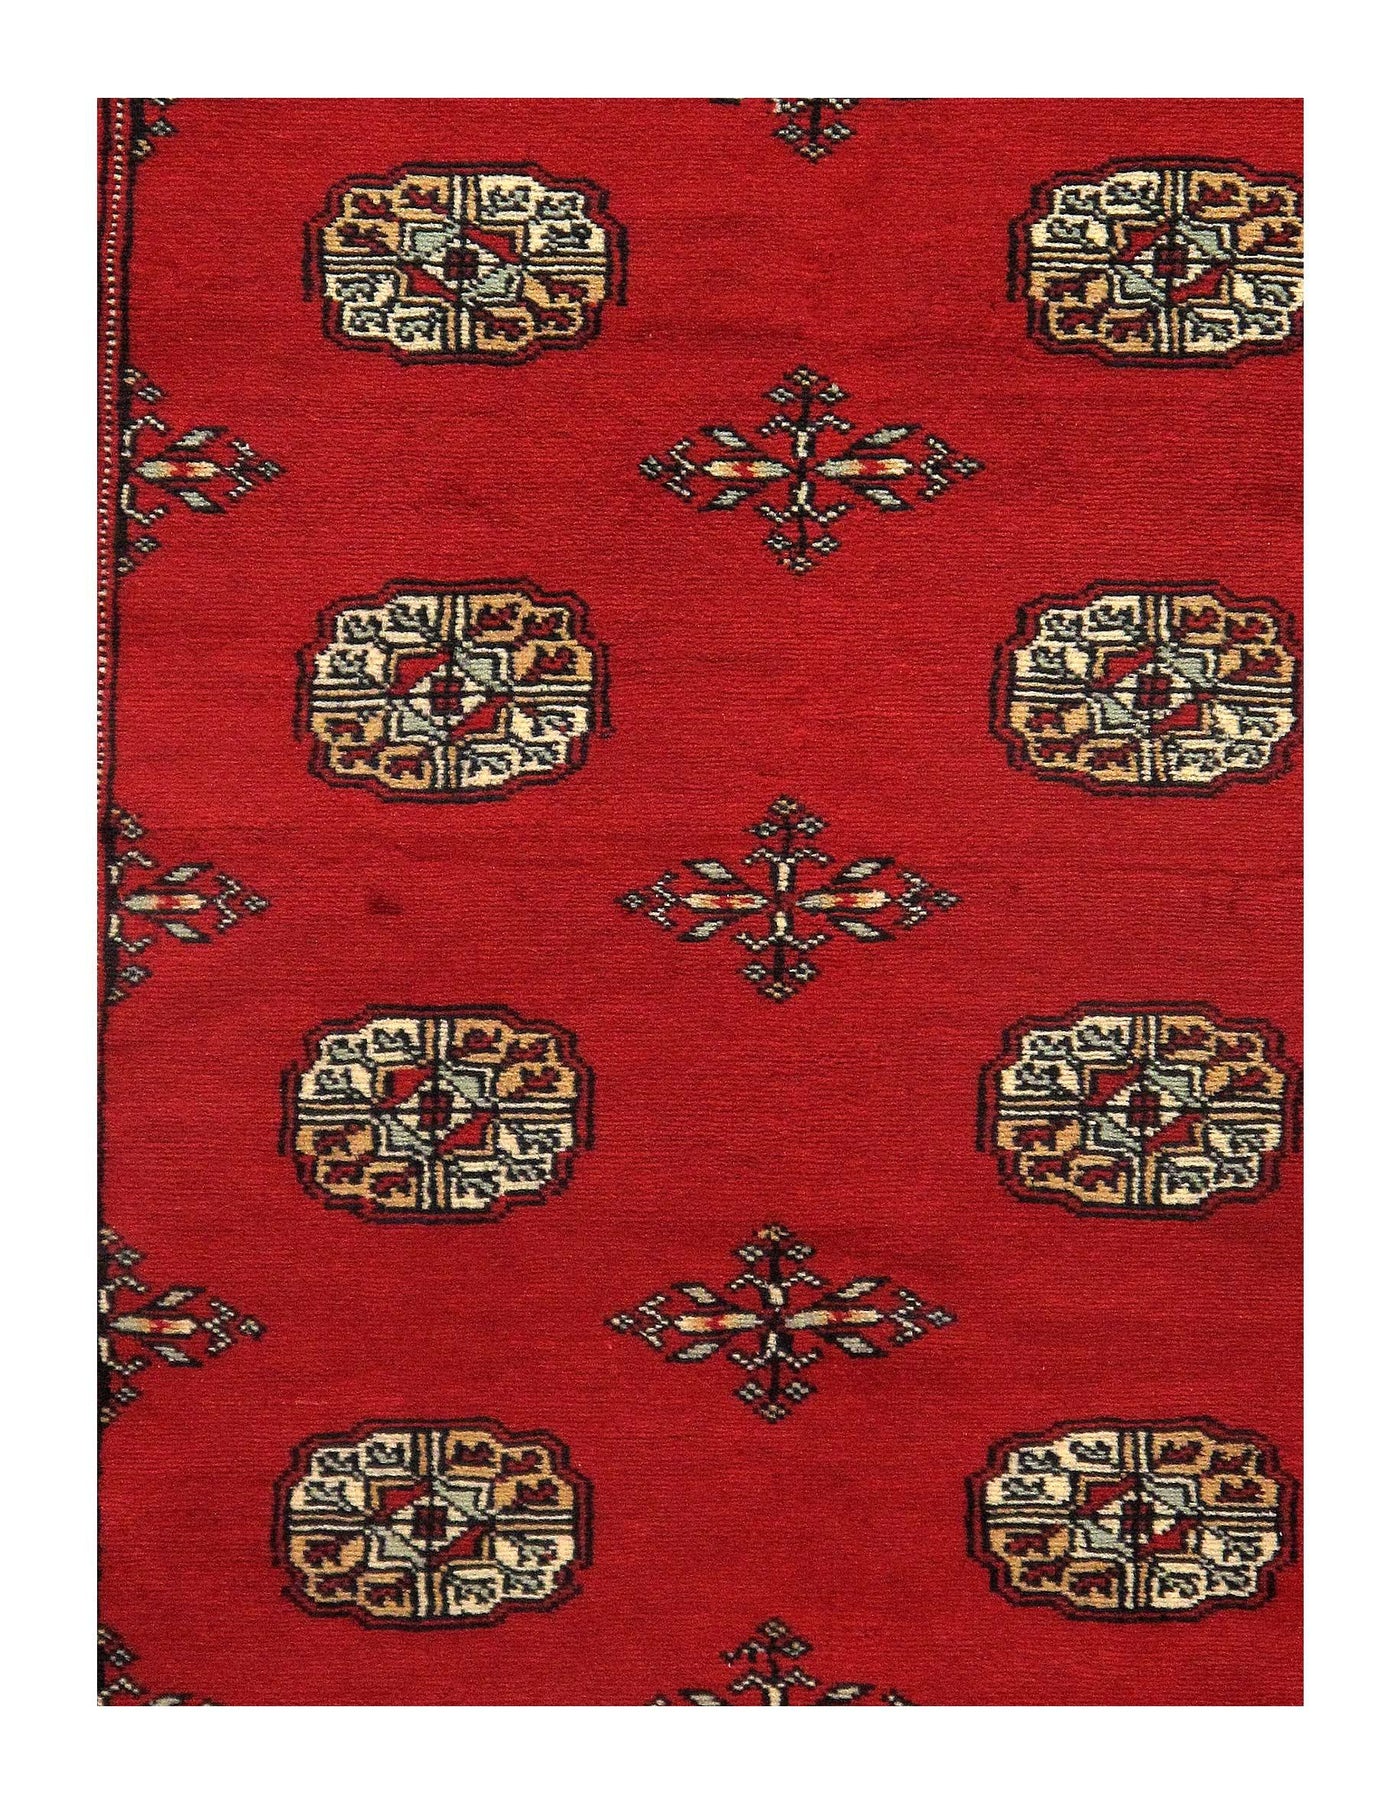 Fine Pak Bokhara Hand-Knotted Rug - 4'7" × 6'7"